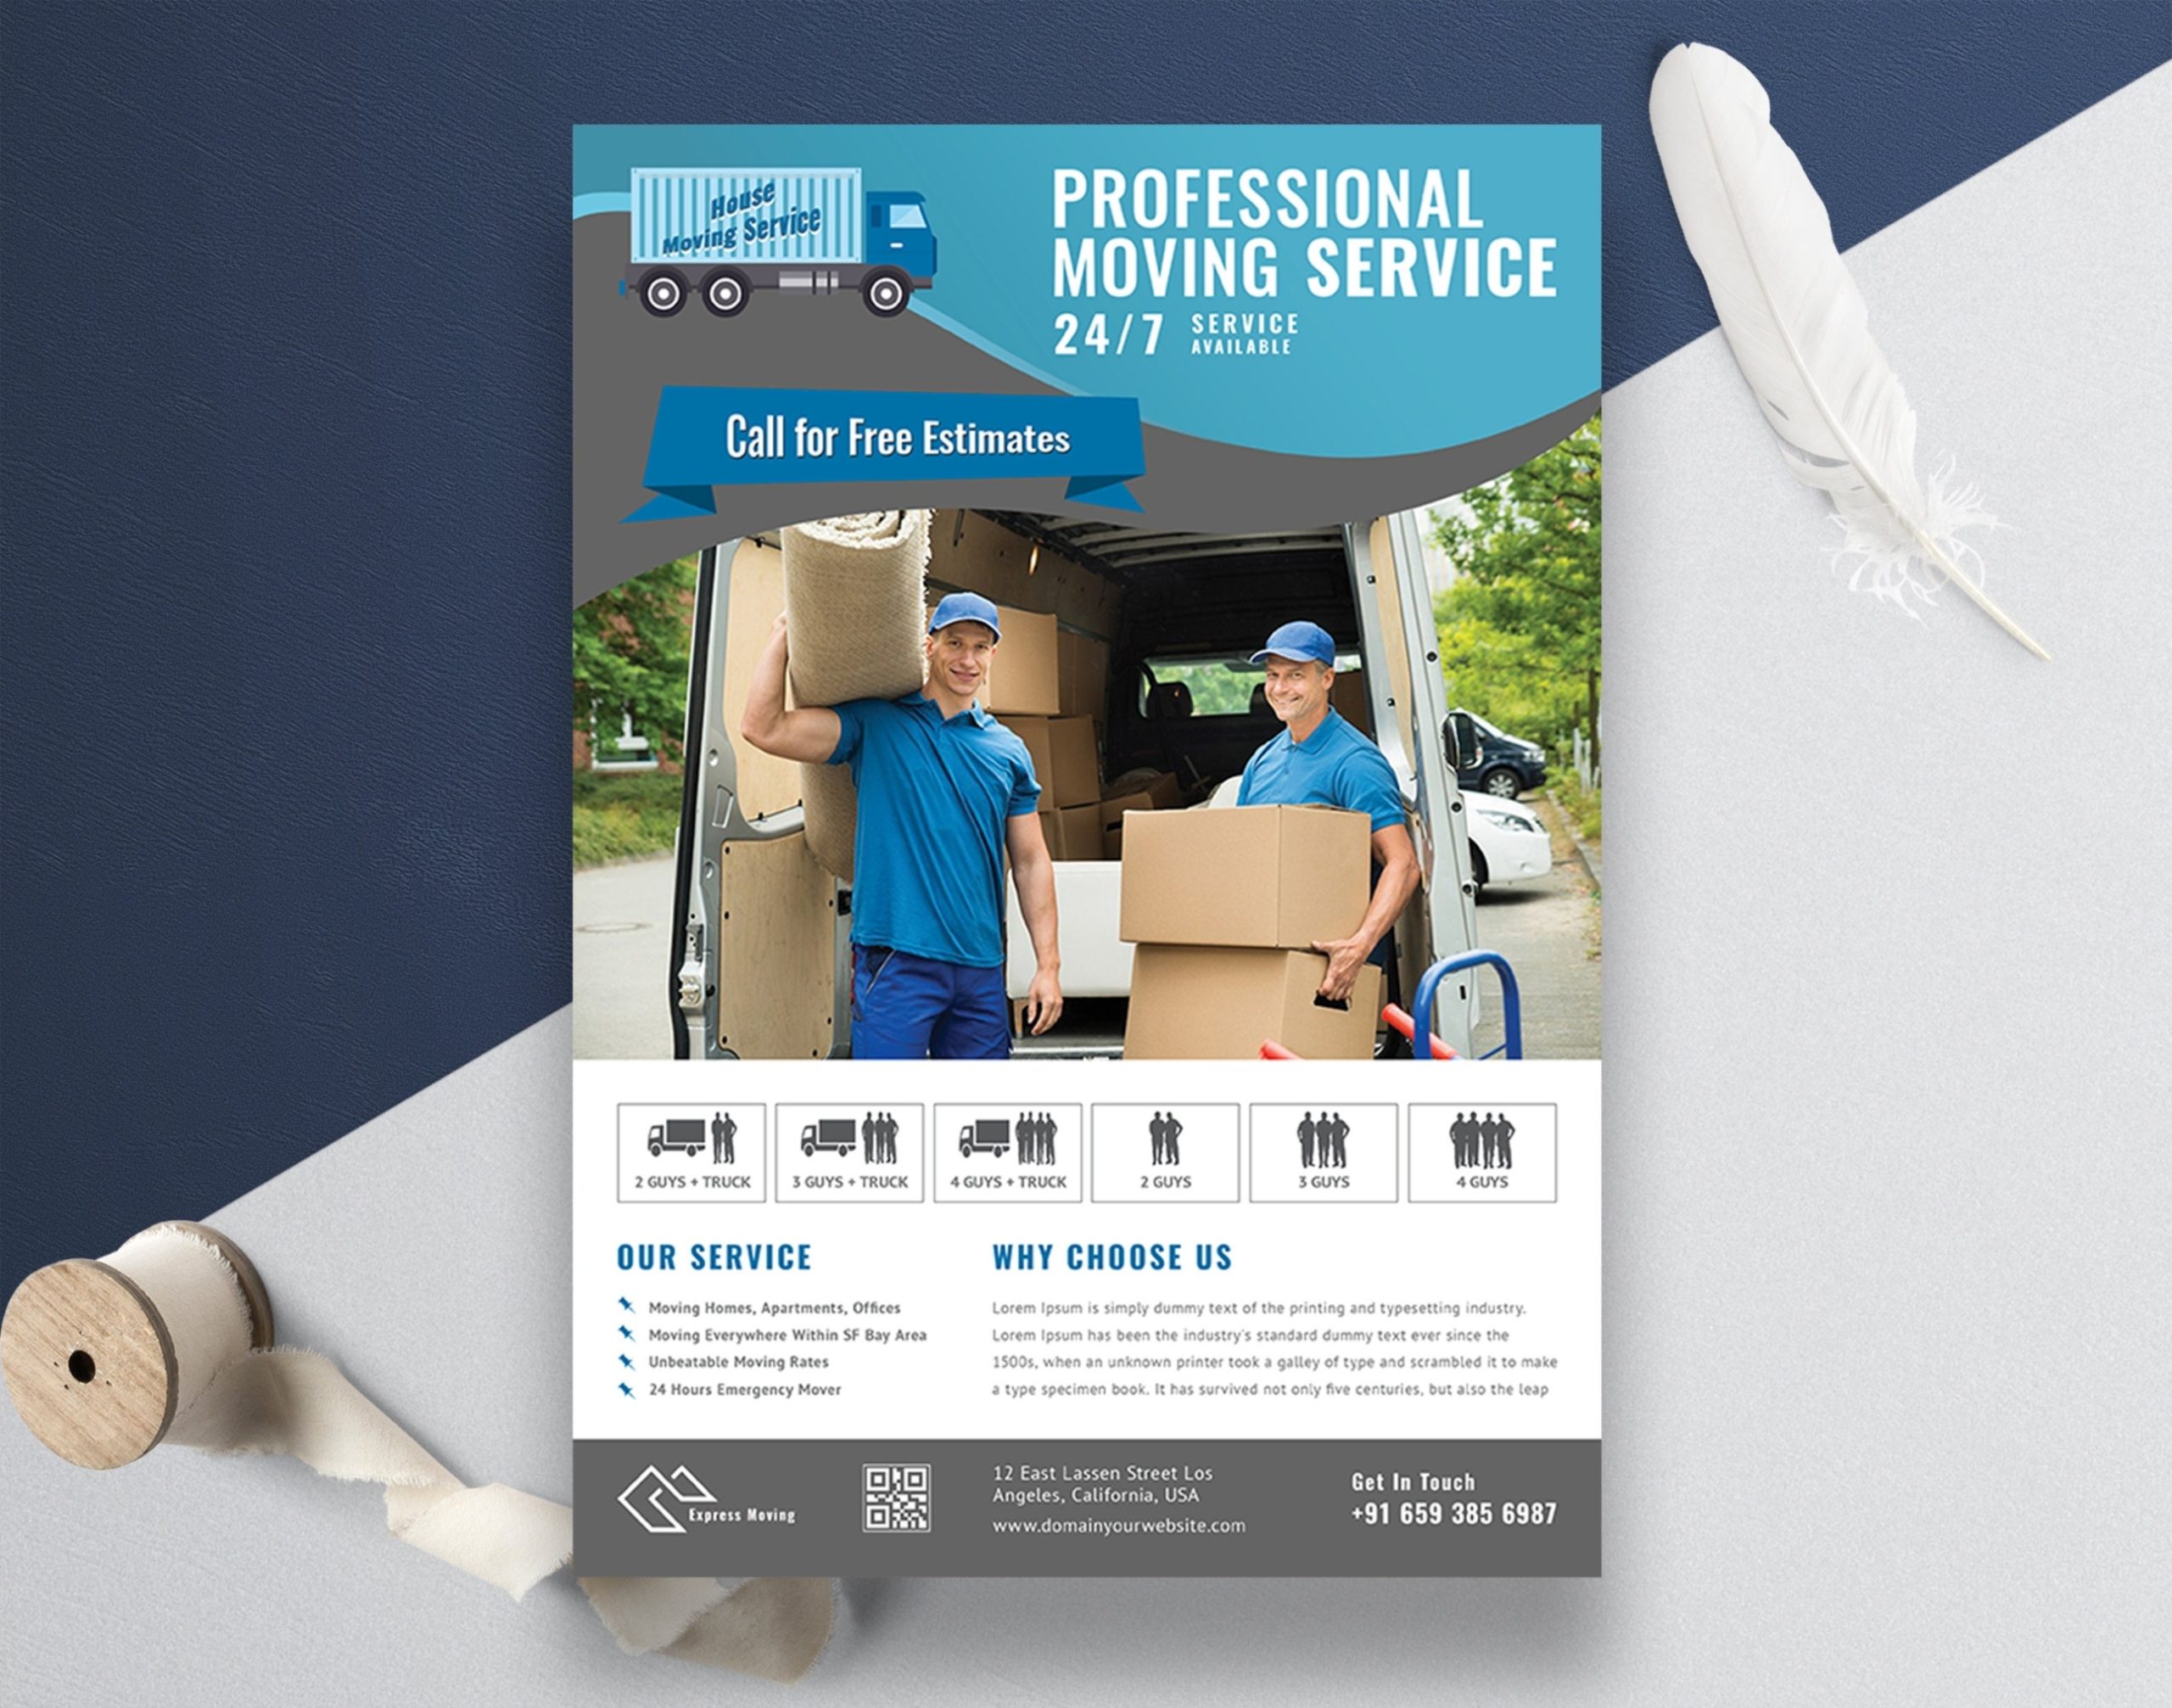 Moving Services Flyer Template Ms Word & Photoshop Files | Etsy For Moving Flyer Template